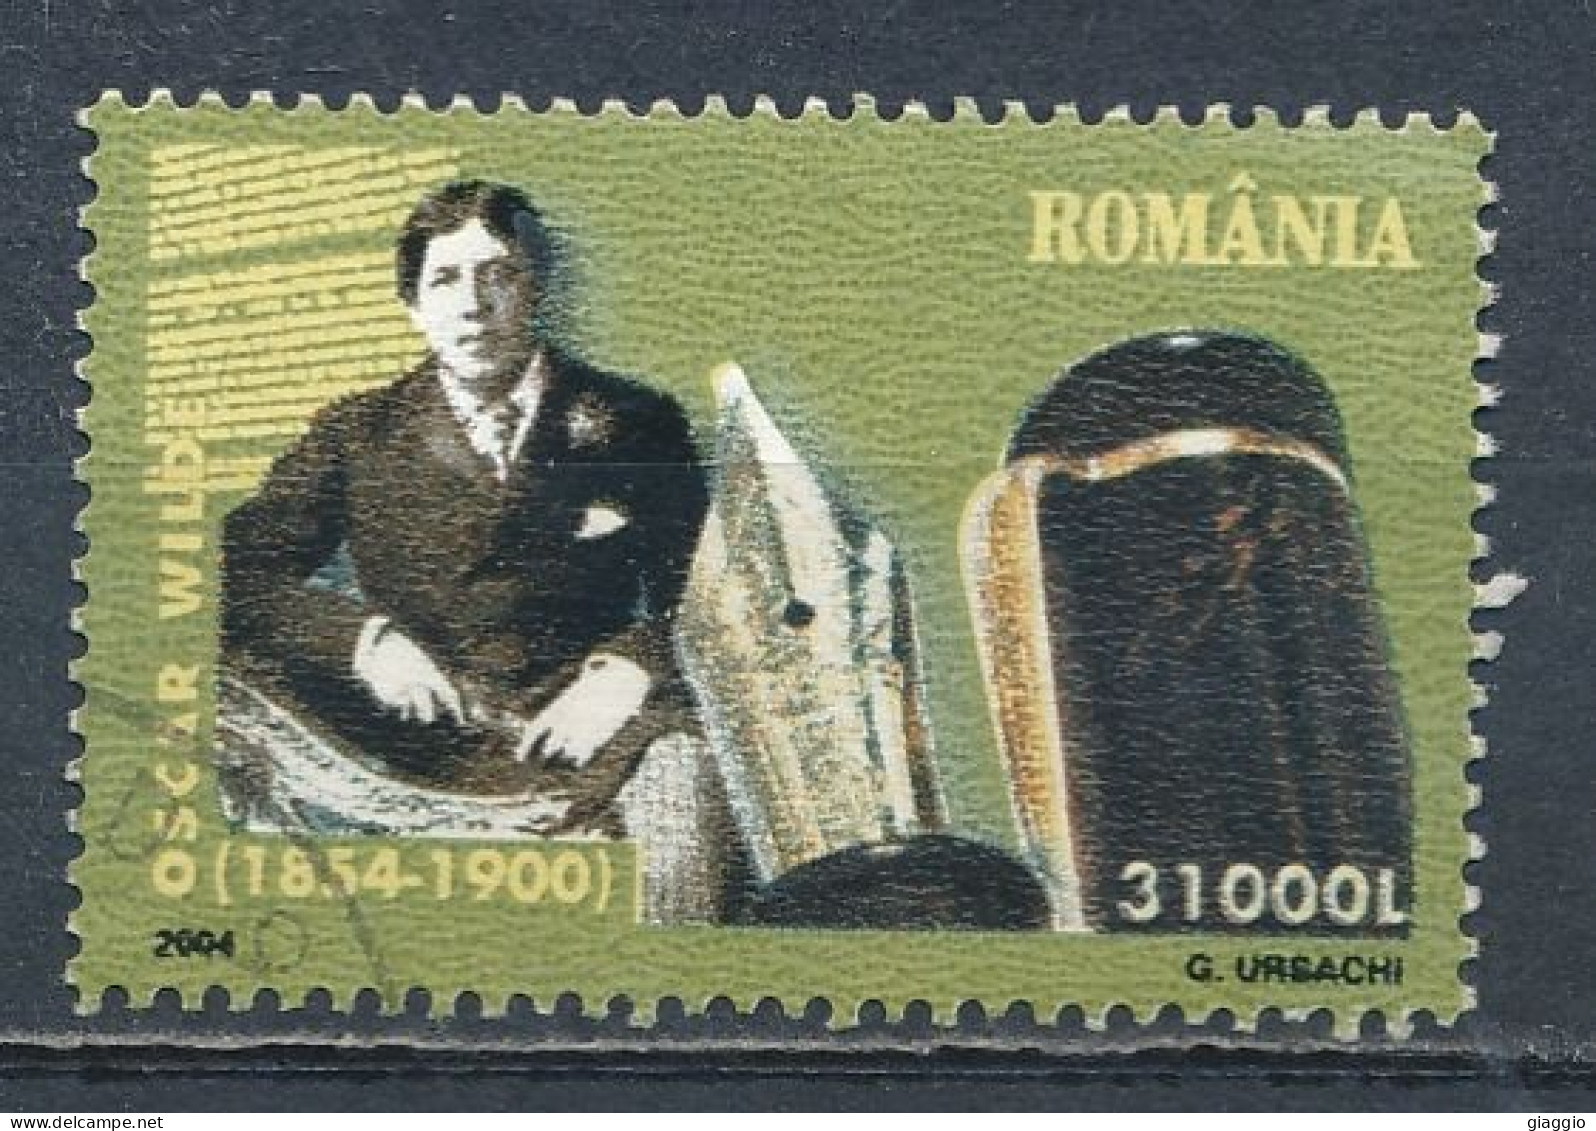 °°° ROMANIA - Y&T N° 4892 - 2004 °°° - Used Stamps